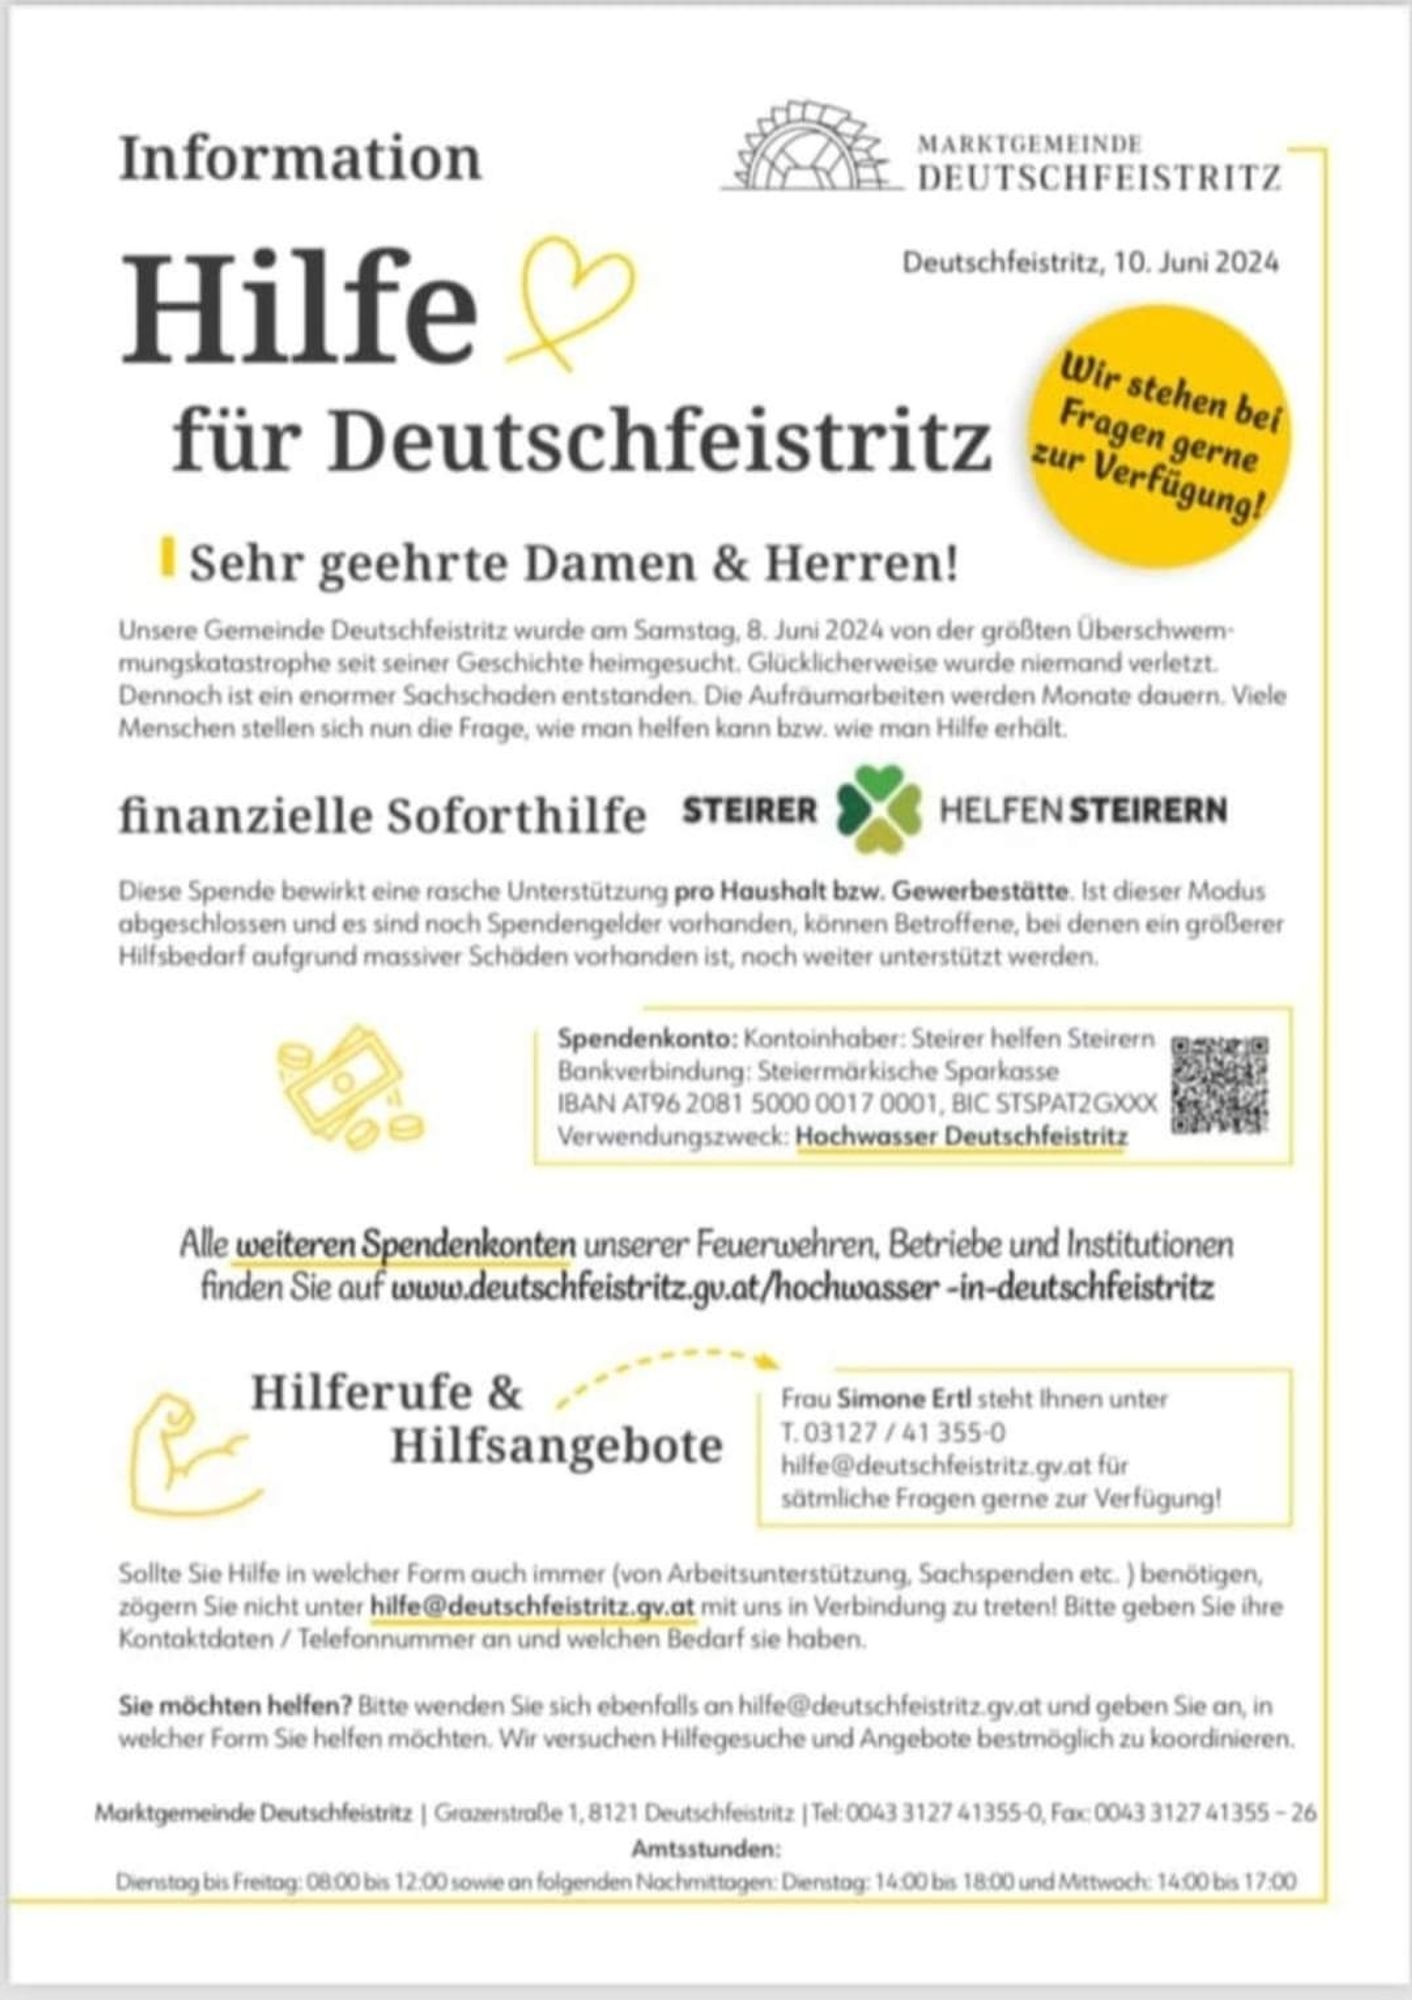 a white paper with black text and yellow circle